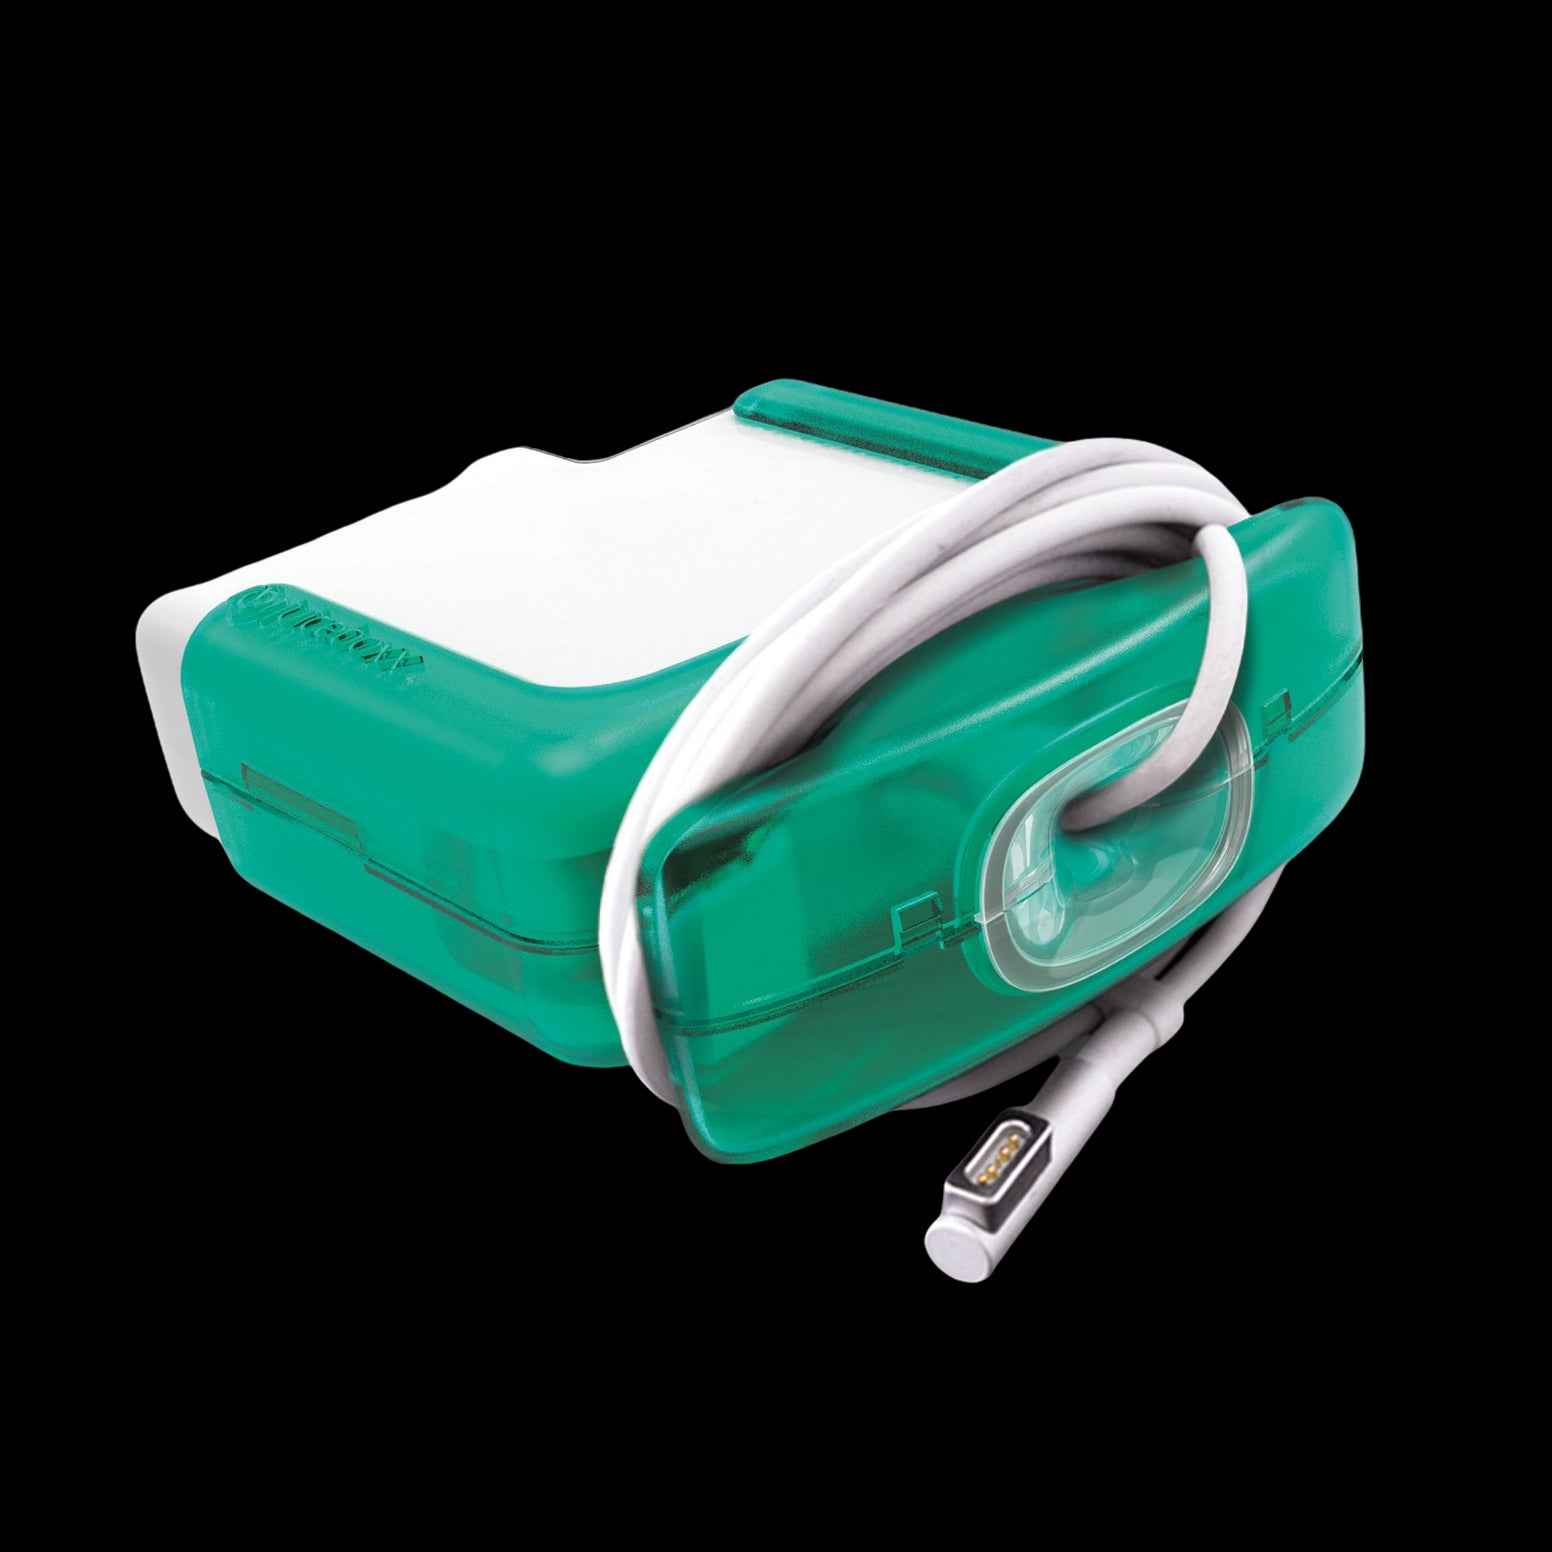 Juiceboxx Charger Case (for 45w Apple Power Adapter/Charger) - Teal